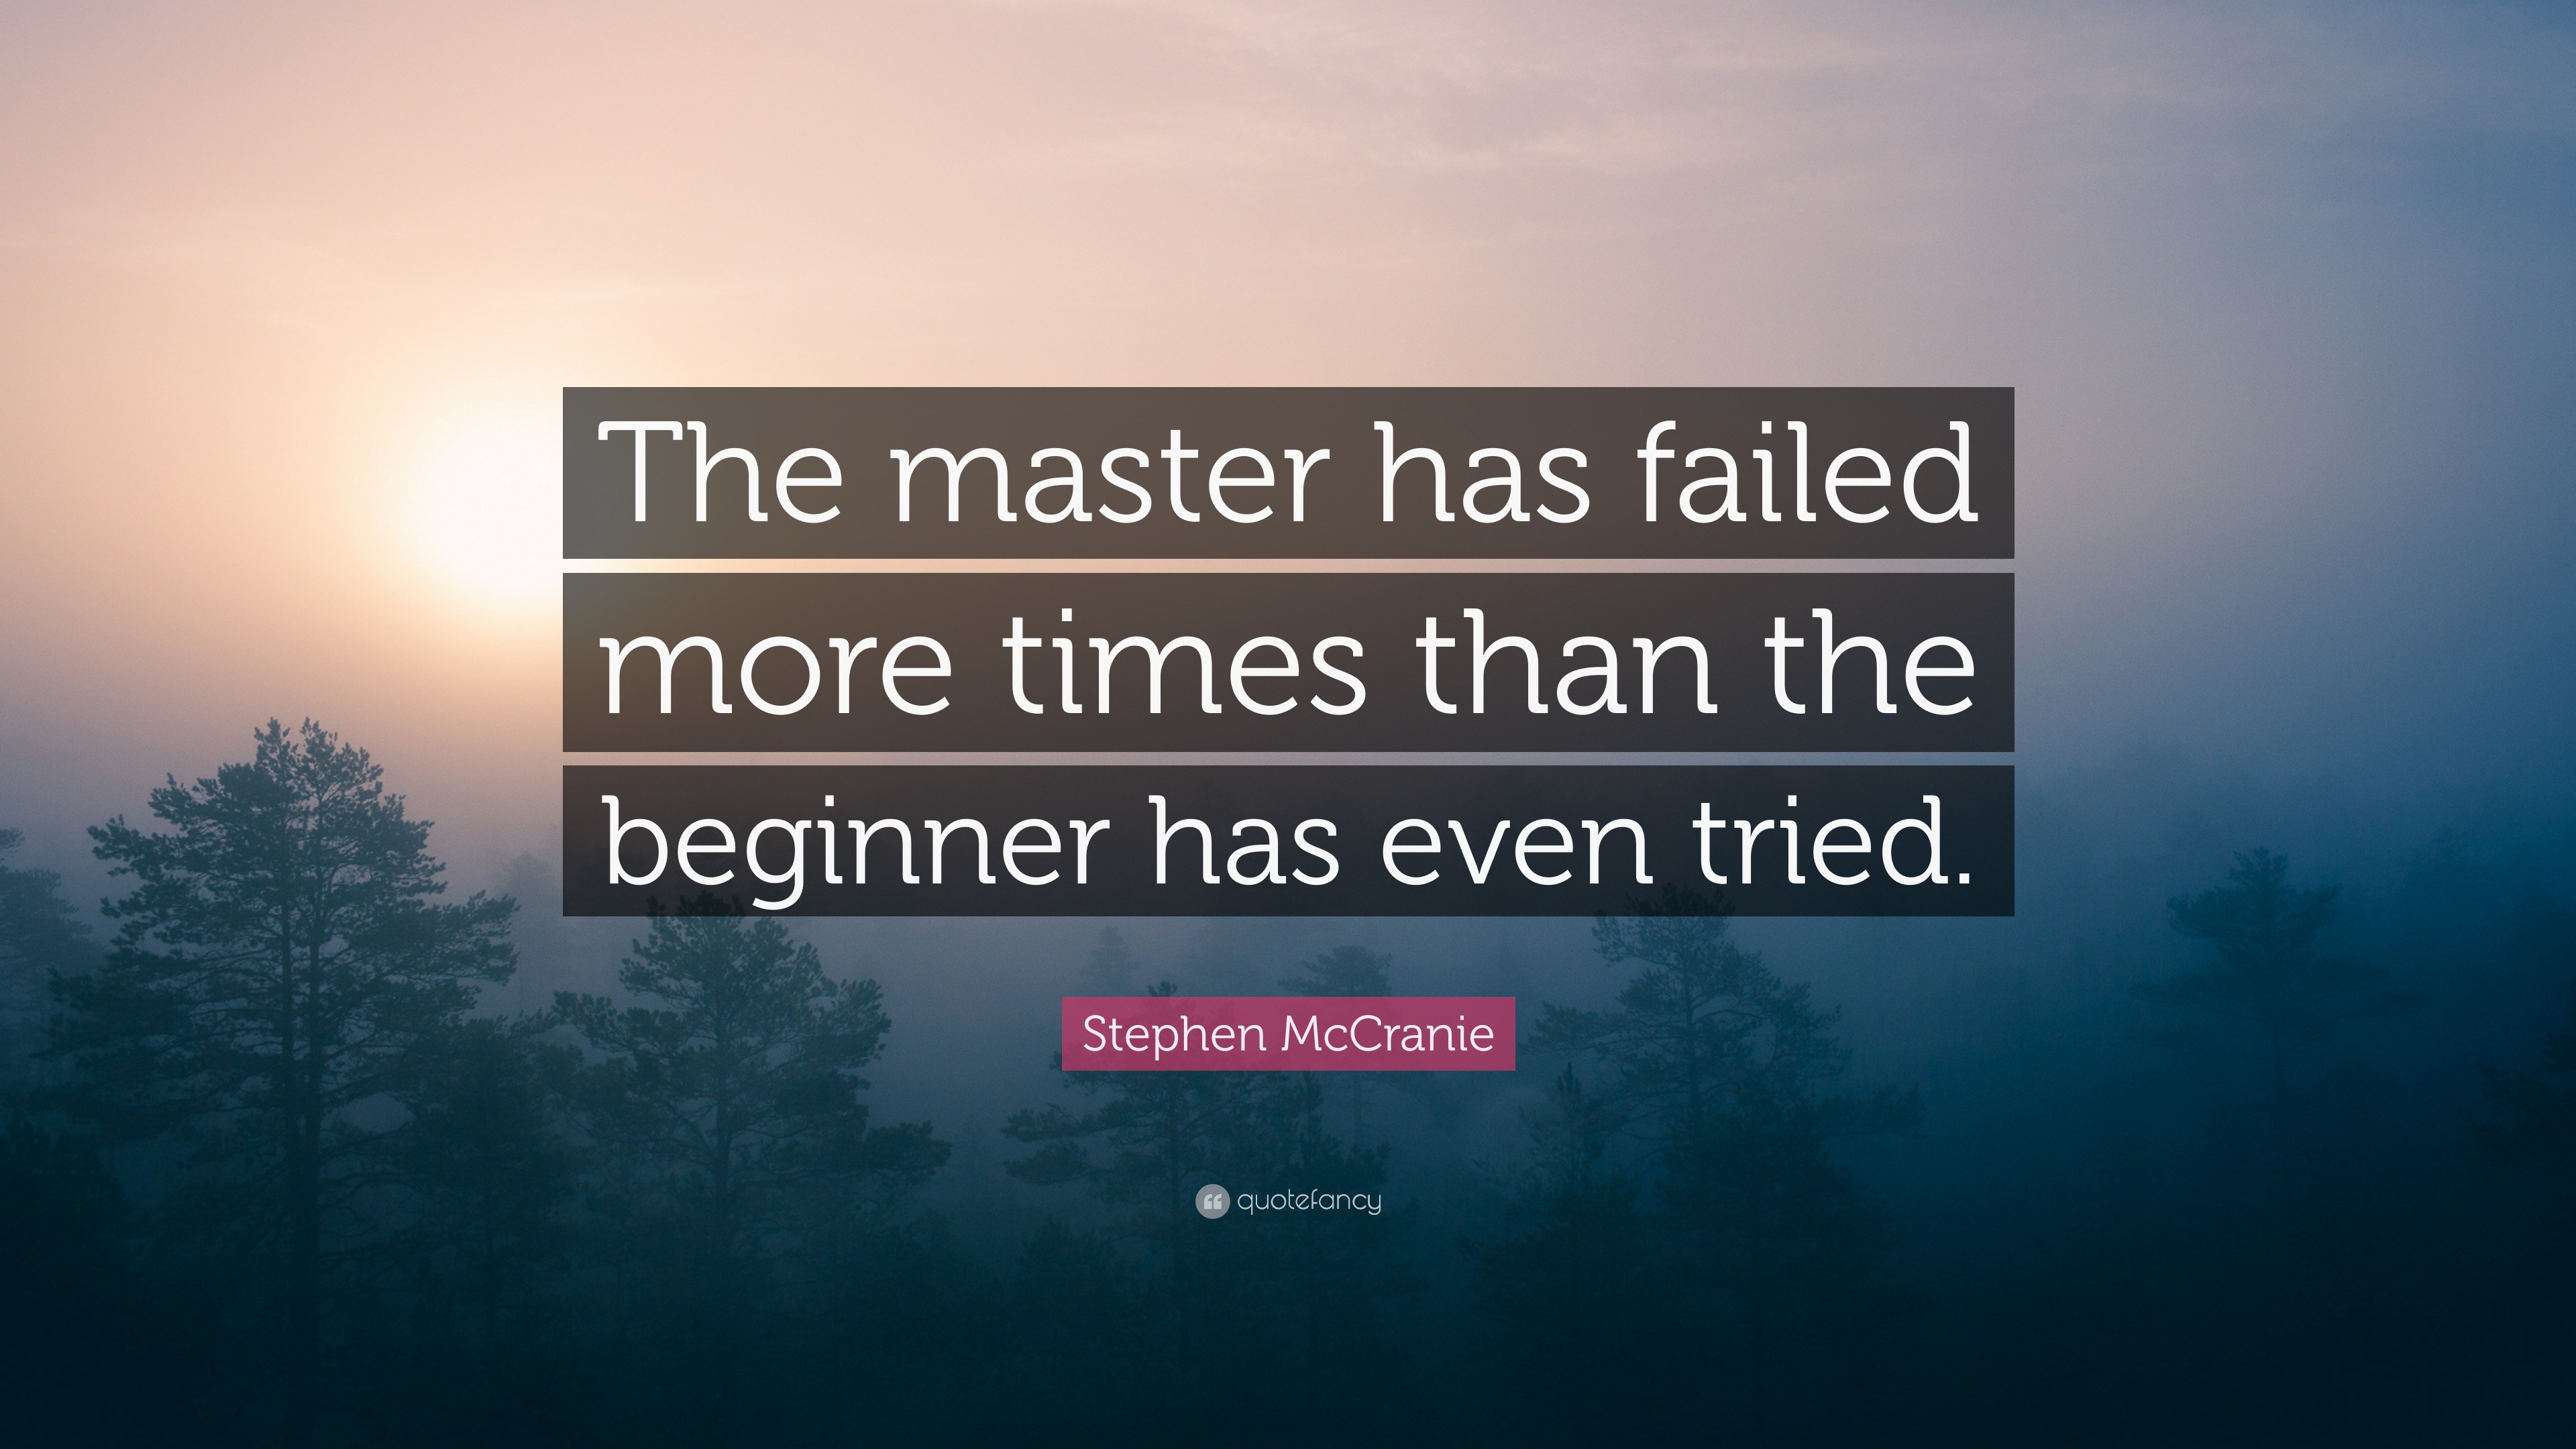 Stephen McCranie Quote: "The master has failed more times than the beginner has even tried." (18 ...